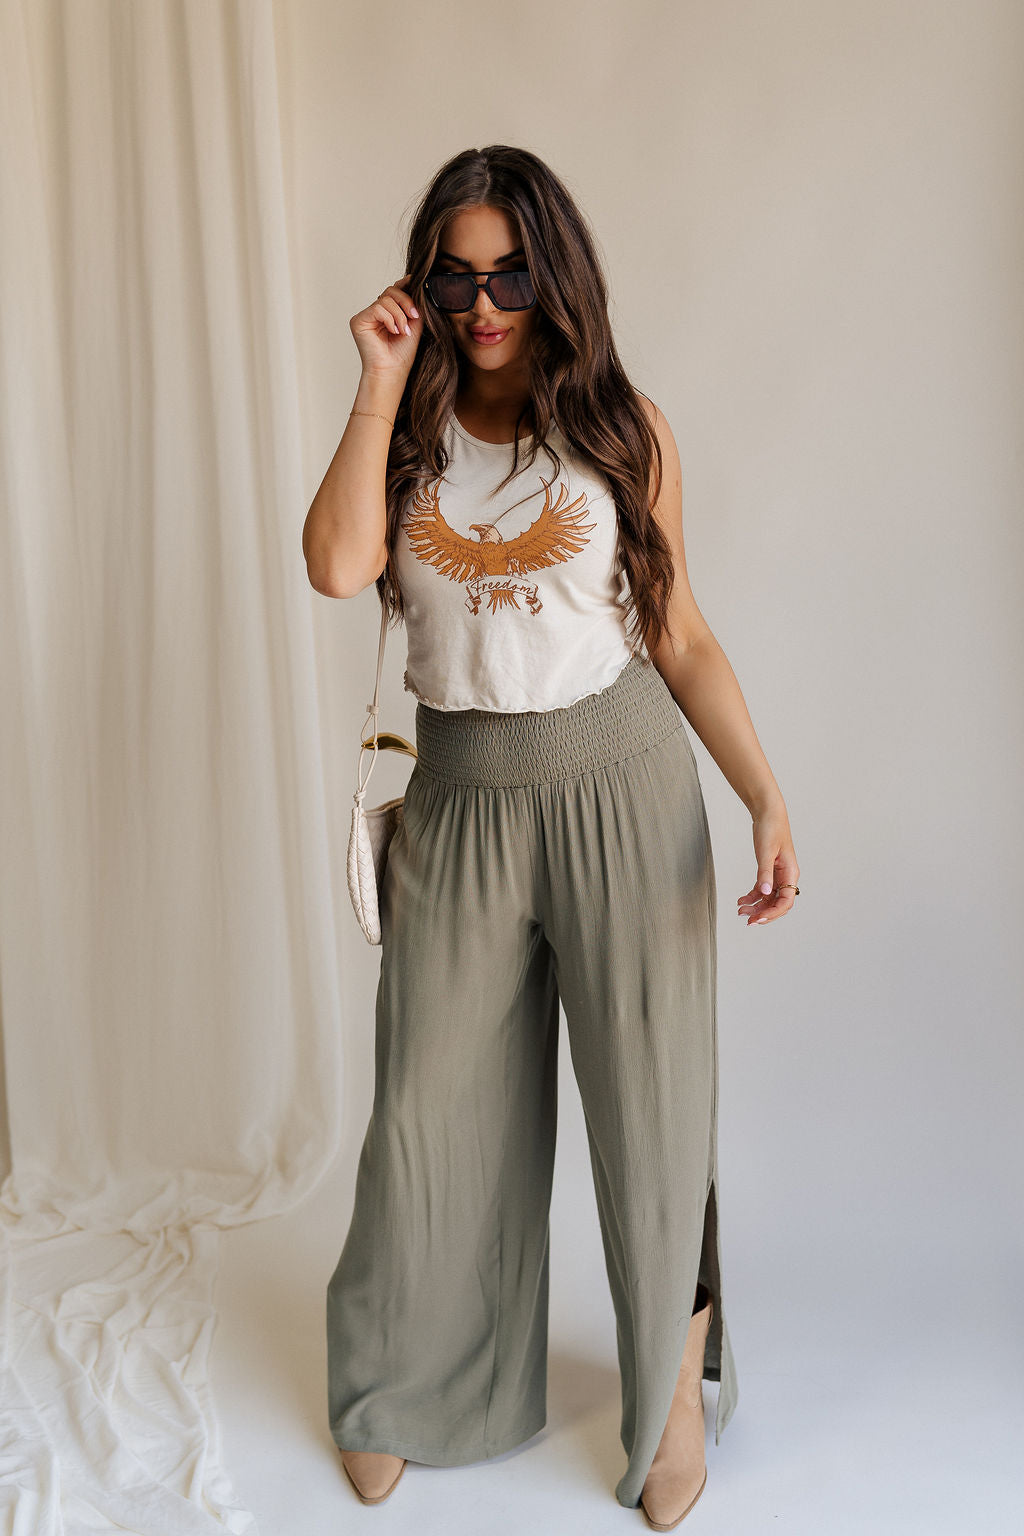 Full body front view of female model wearing the Audrey Olive Green Wide Leg Pants that have olive green fabric, a smocked waist, wide legs, and side slits. Worn with beige tank top